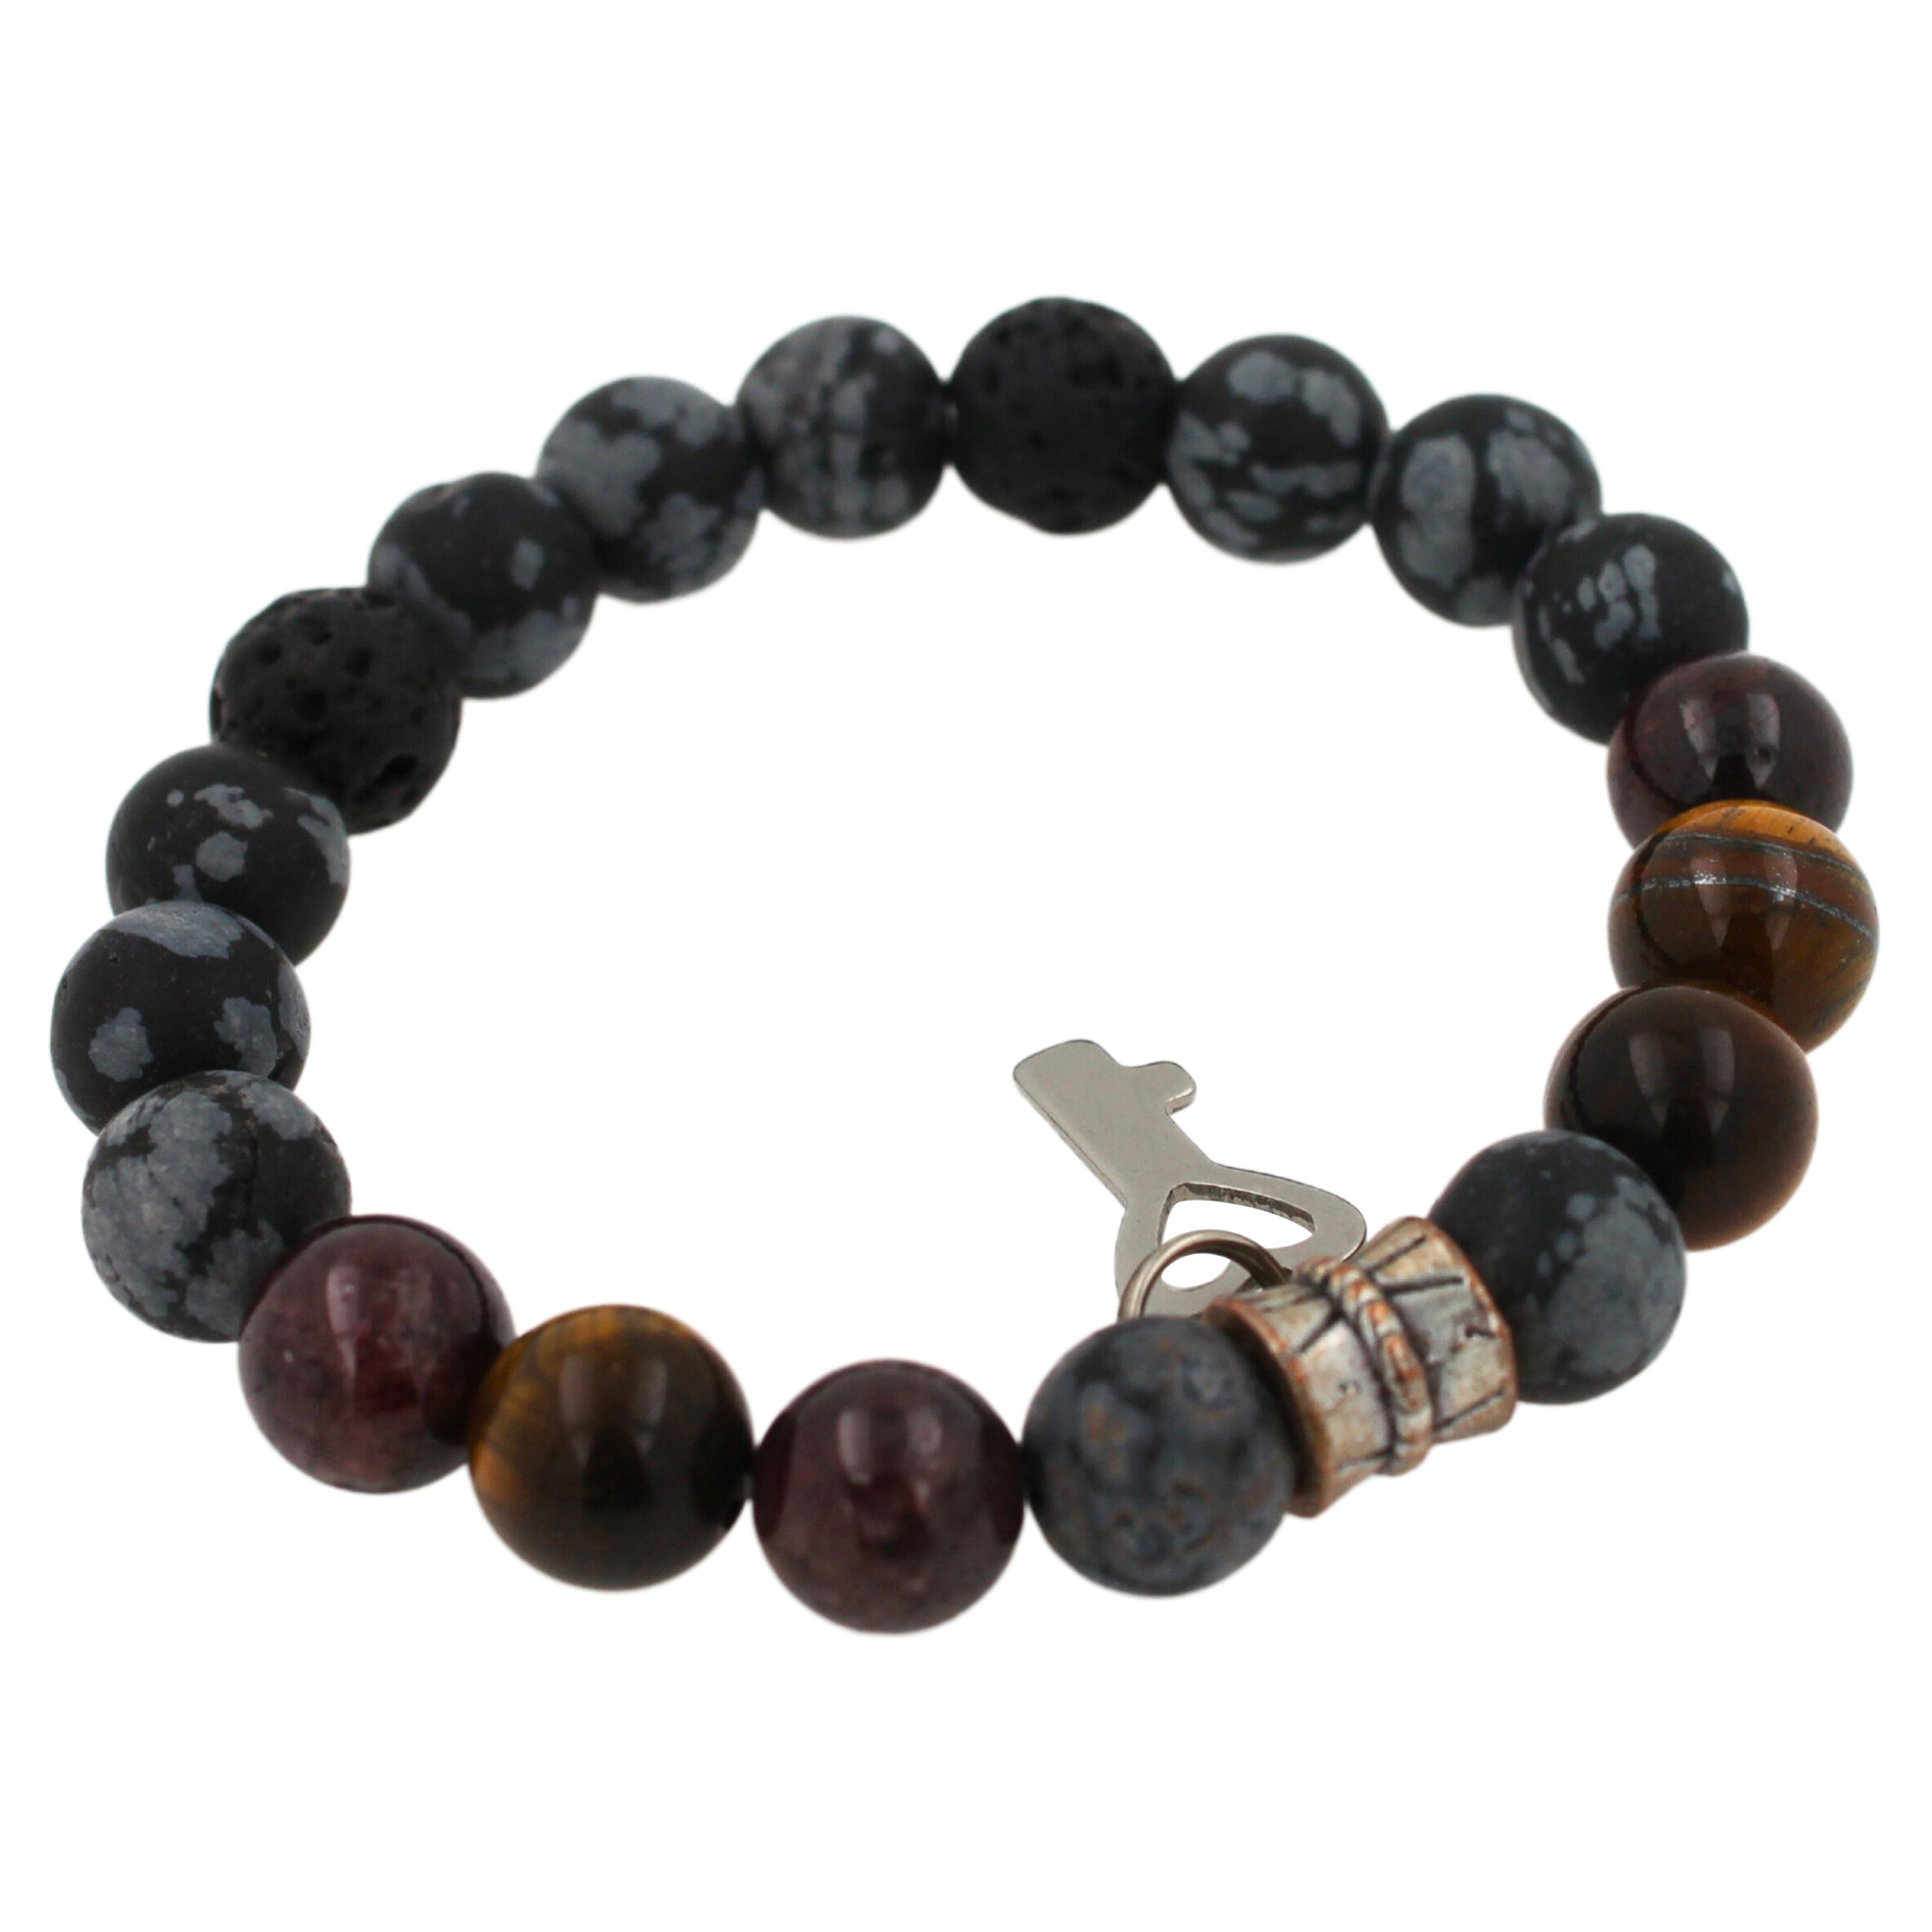 Black Agate Earth Gemstone Round Chakra Beads Stretchy Unique Statement Bracelet For Sale